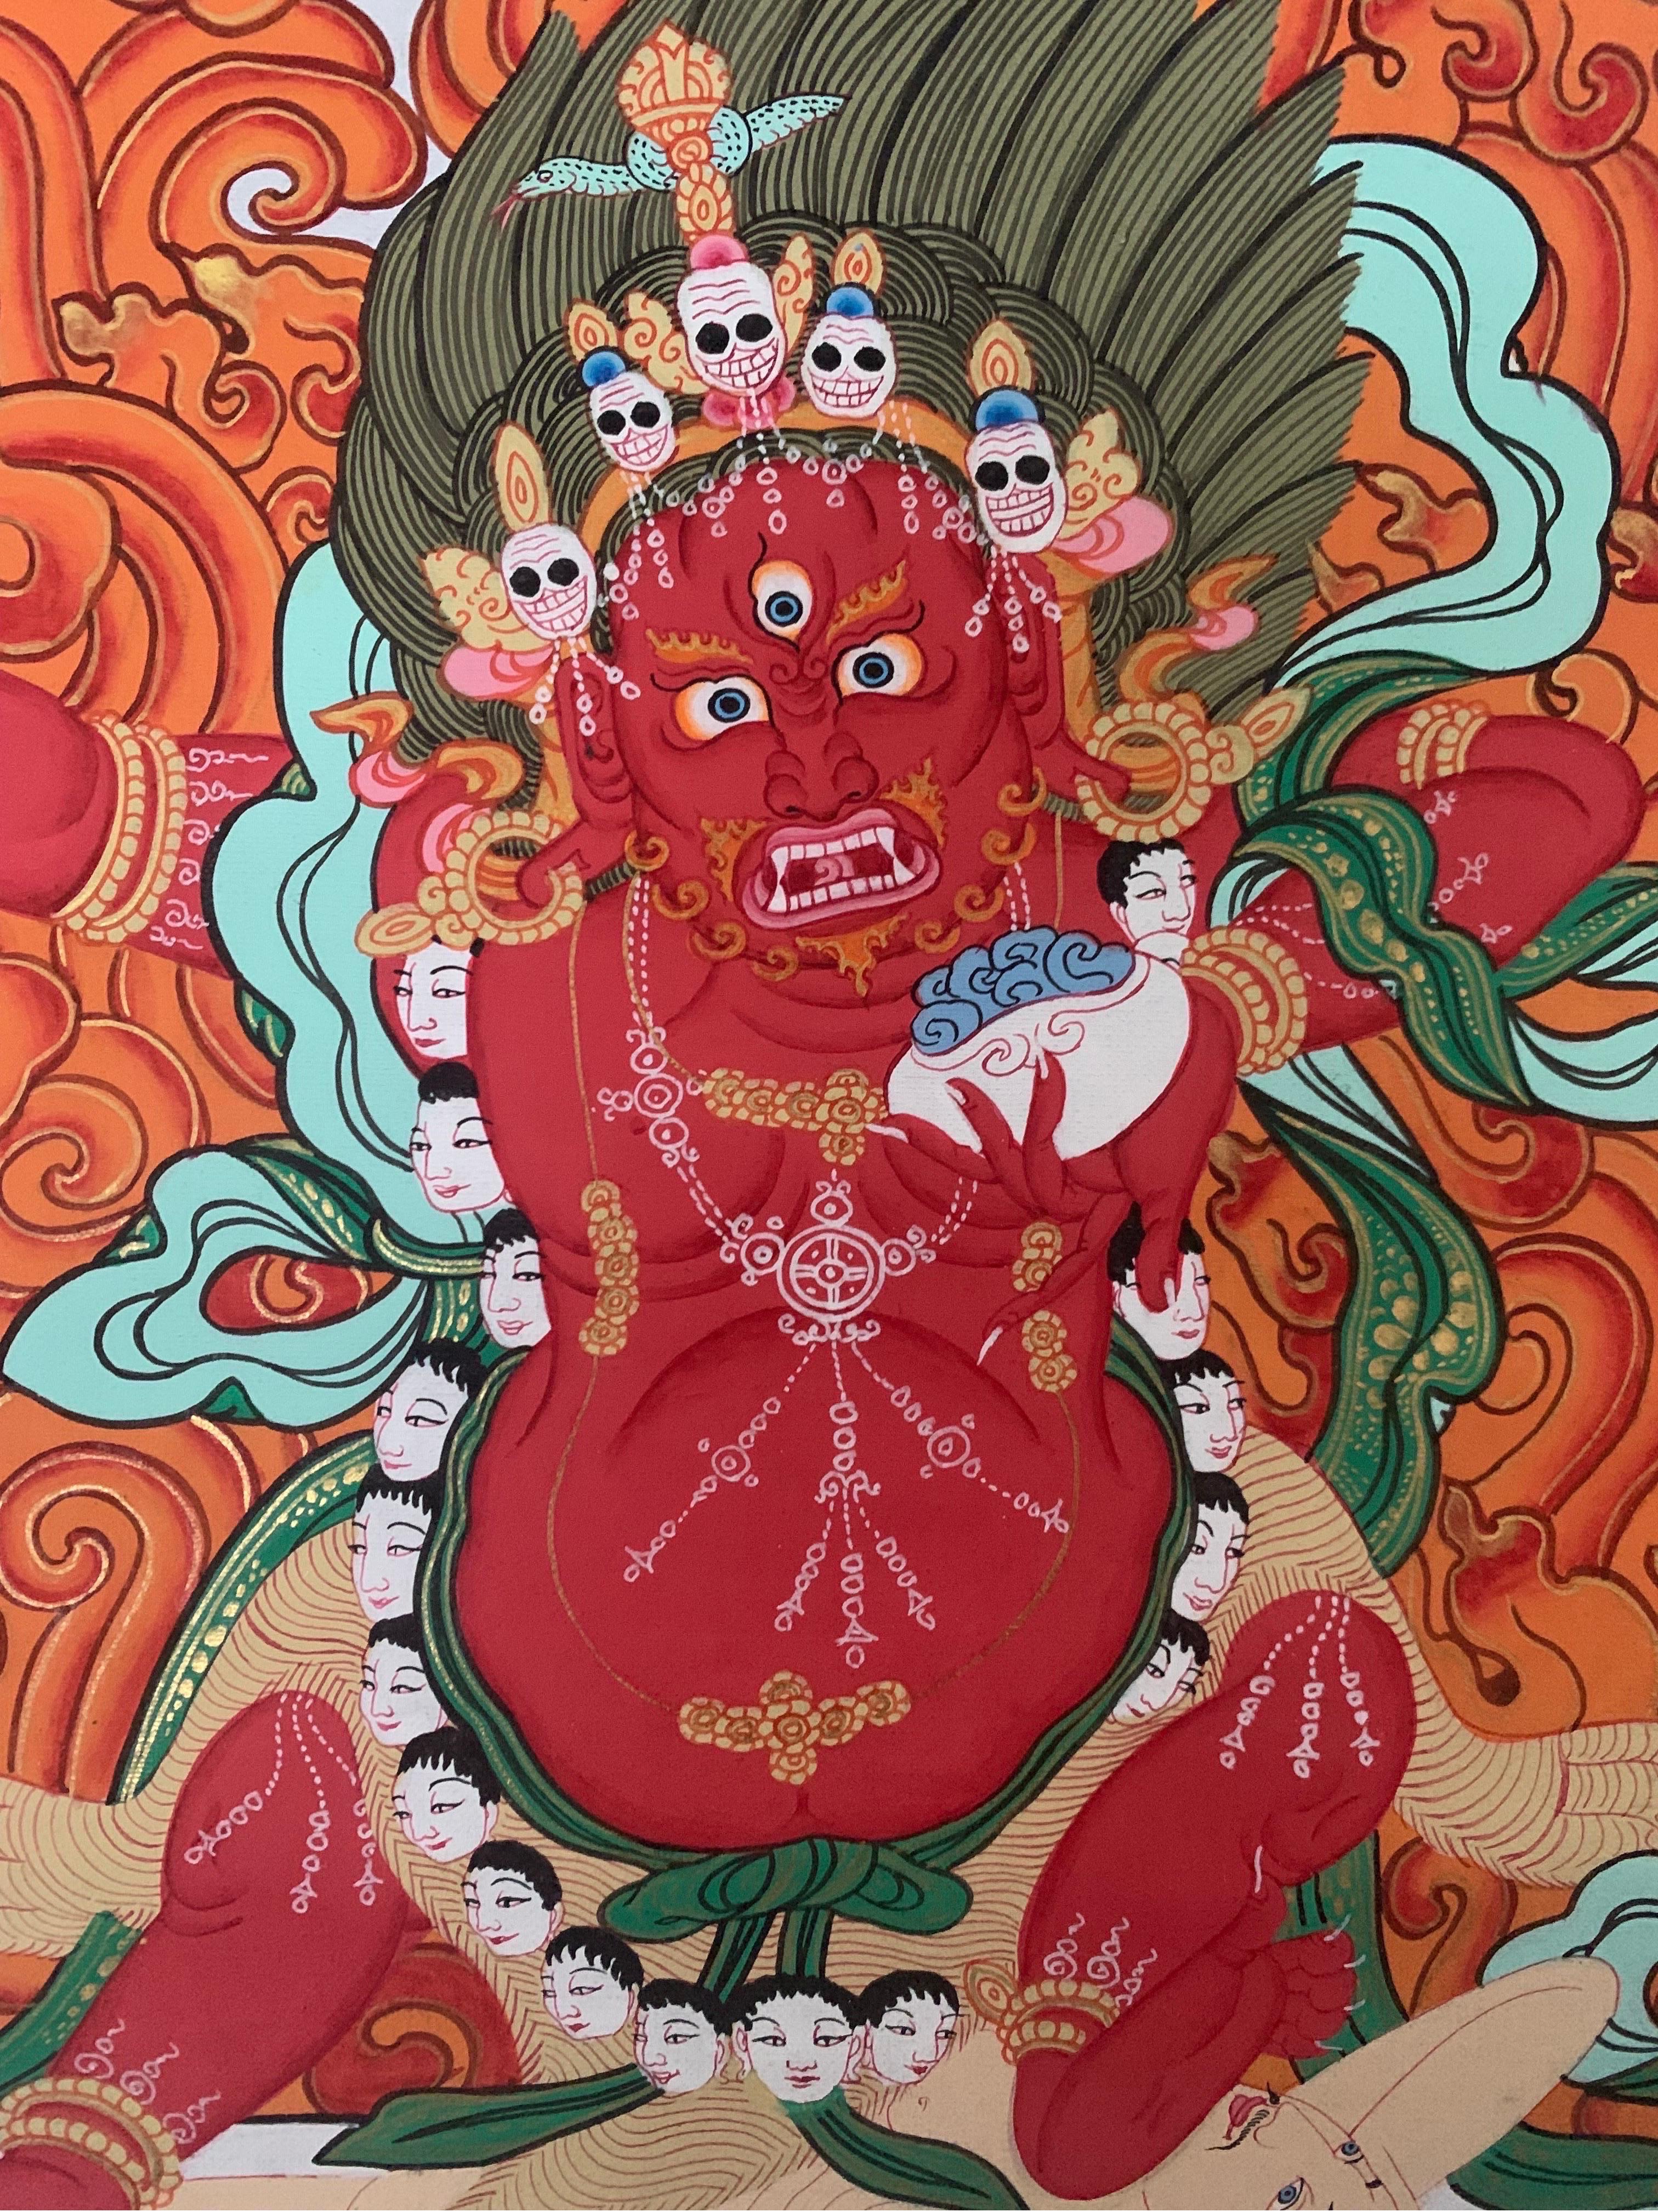 Thangka painting dates back to 7th century after Buddhism was spread in the Himalayan region (Nepal, Bhutan, Tibet and Northern India). In Eastern world Thangka is considered to be a part of Abhi-Dharma which means 